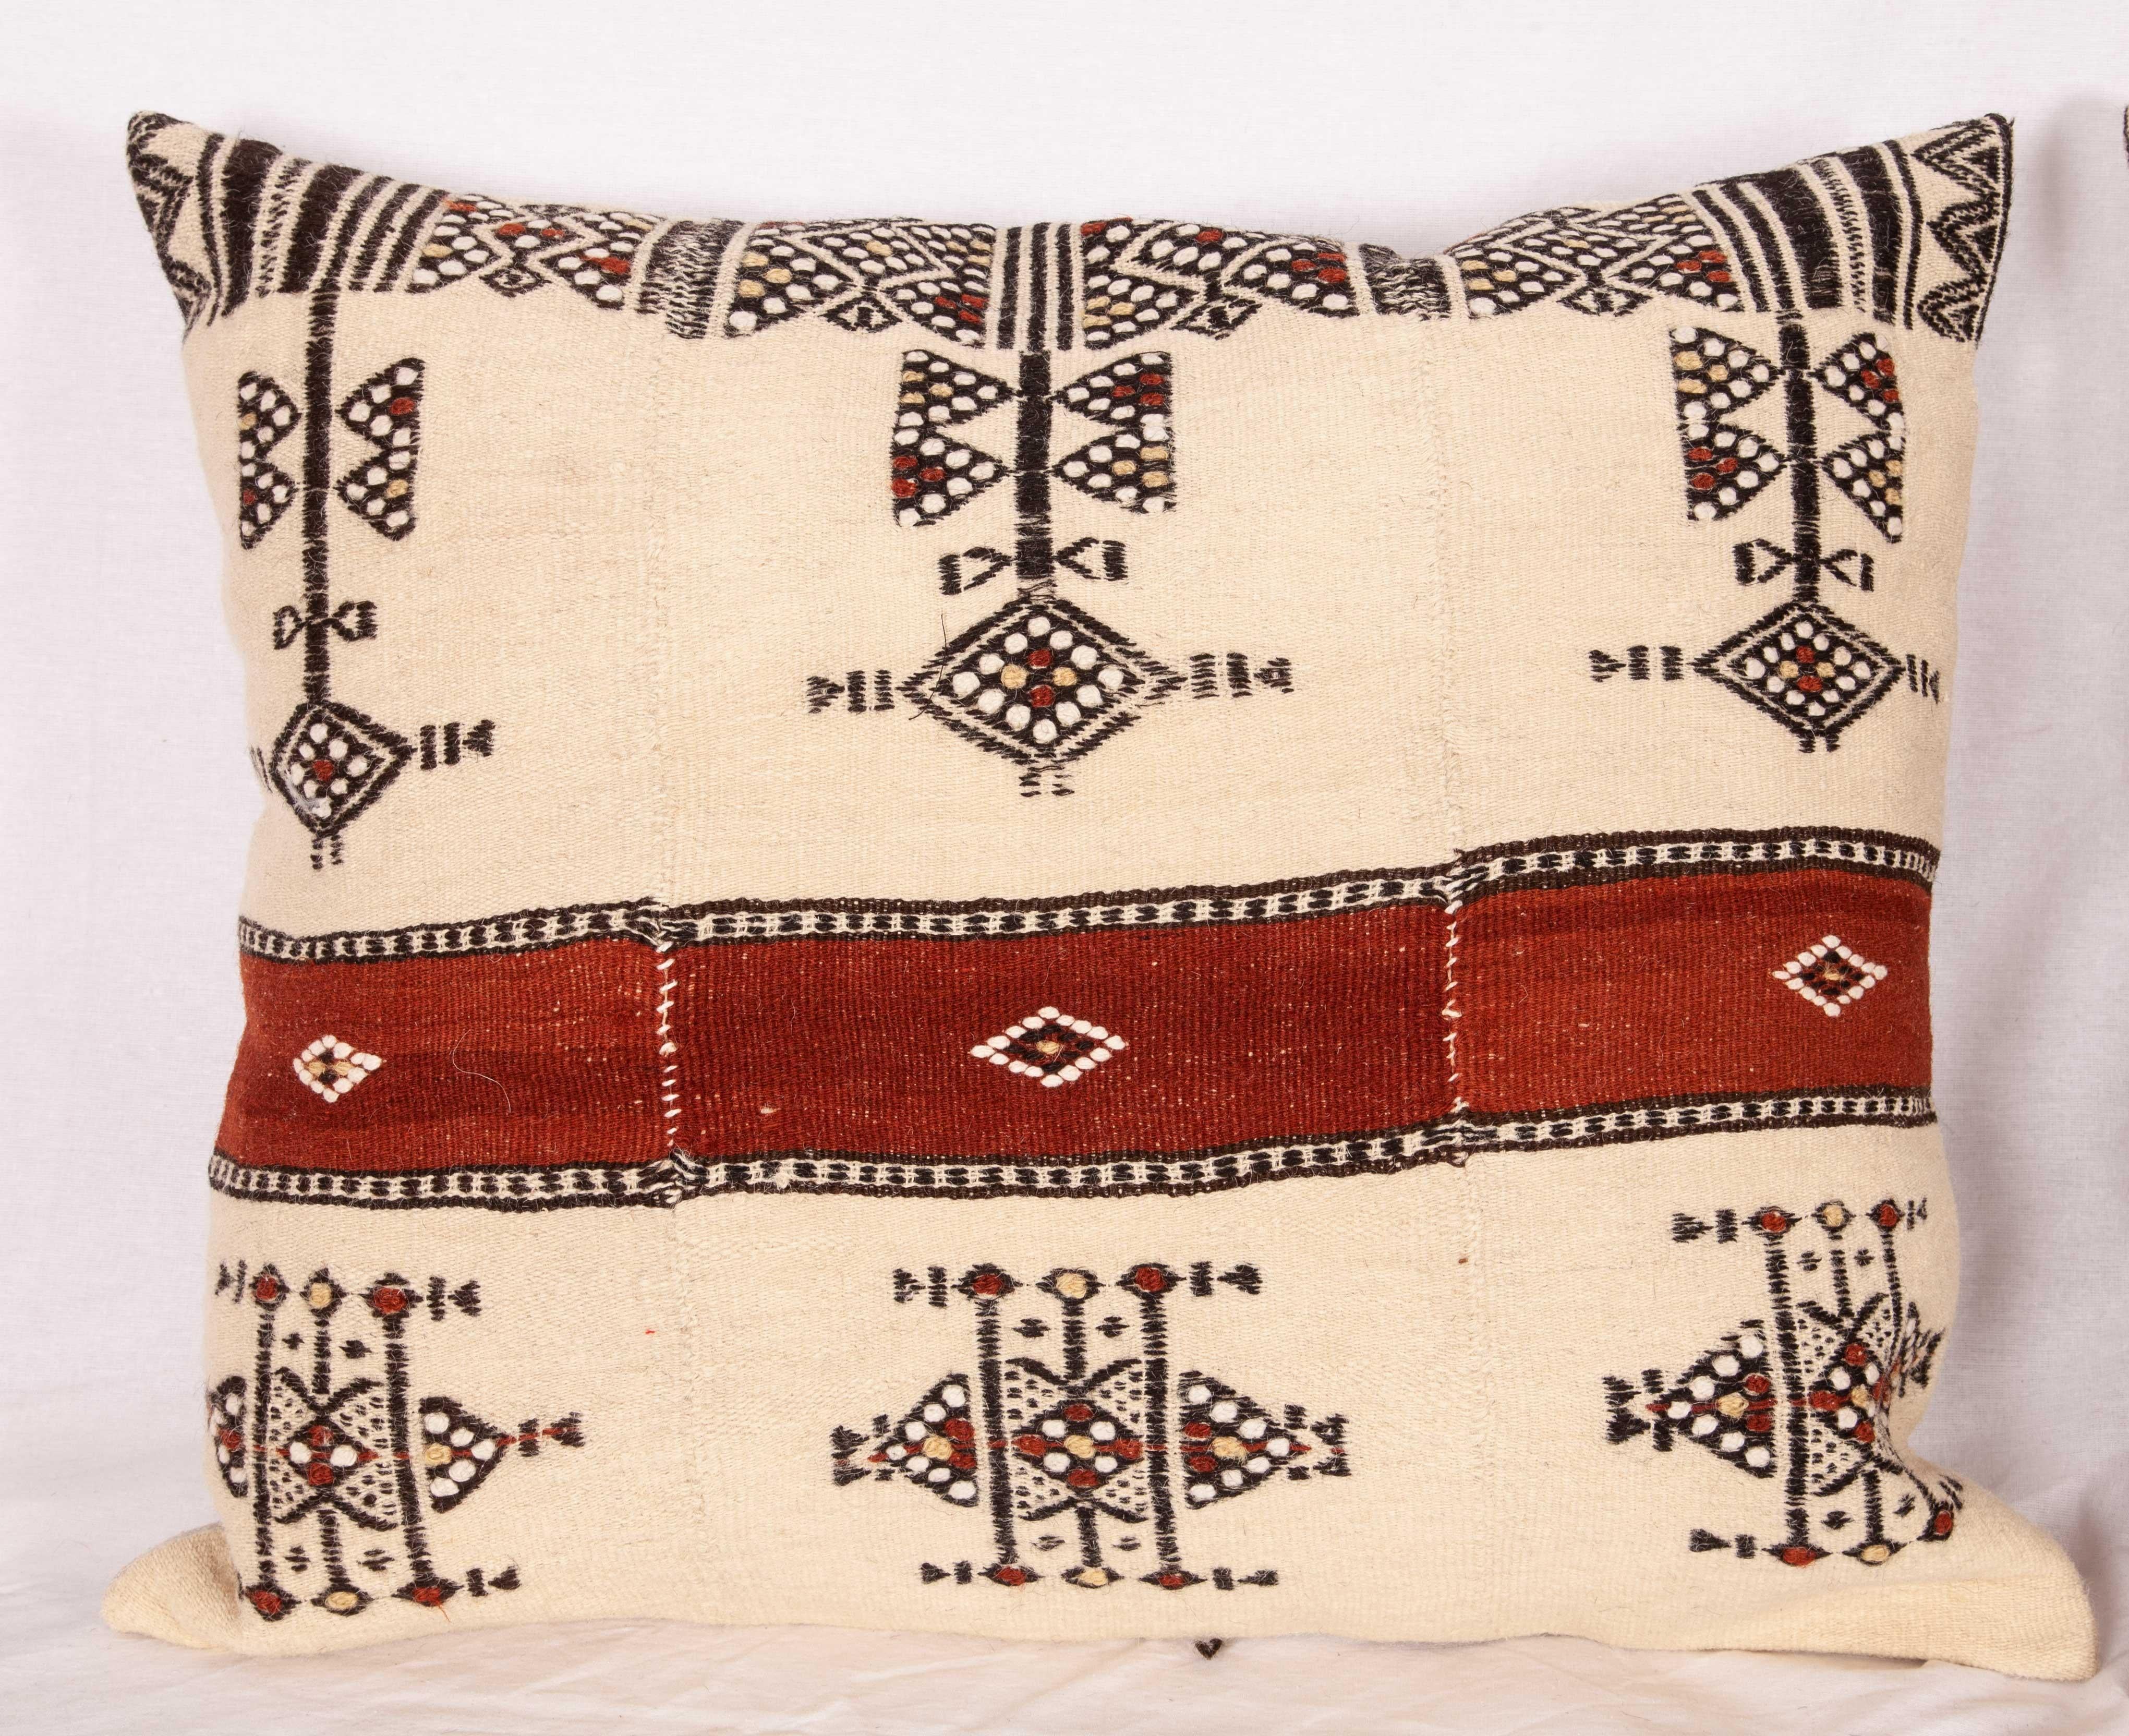 Kilim Fulani Pillow Covers from Mali Africa Mid-20th Century